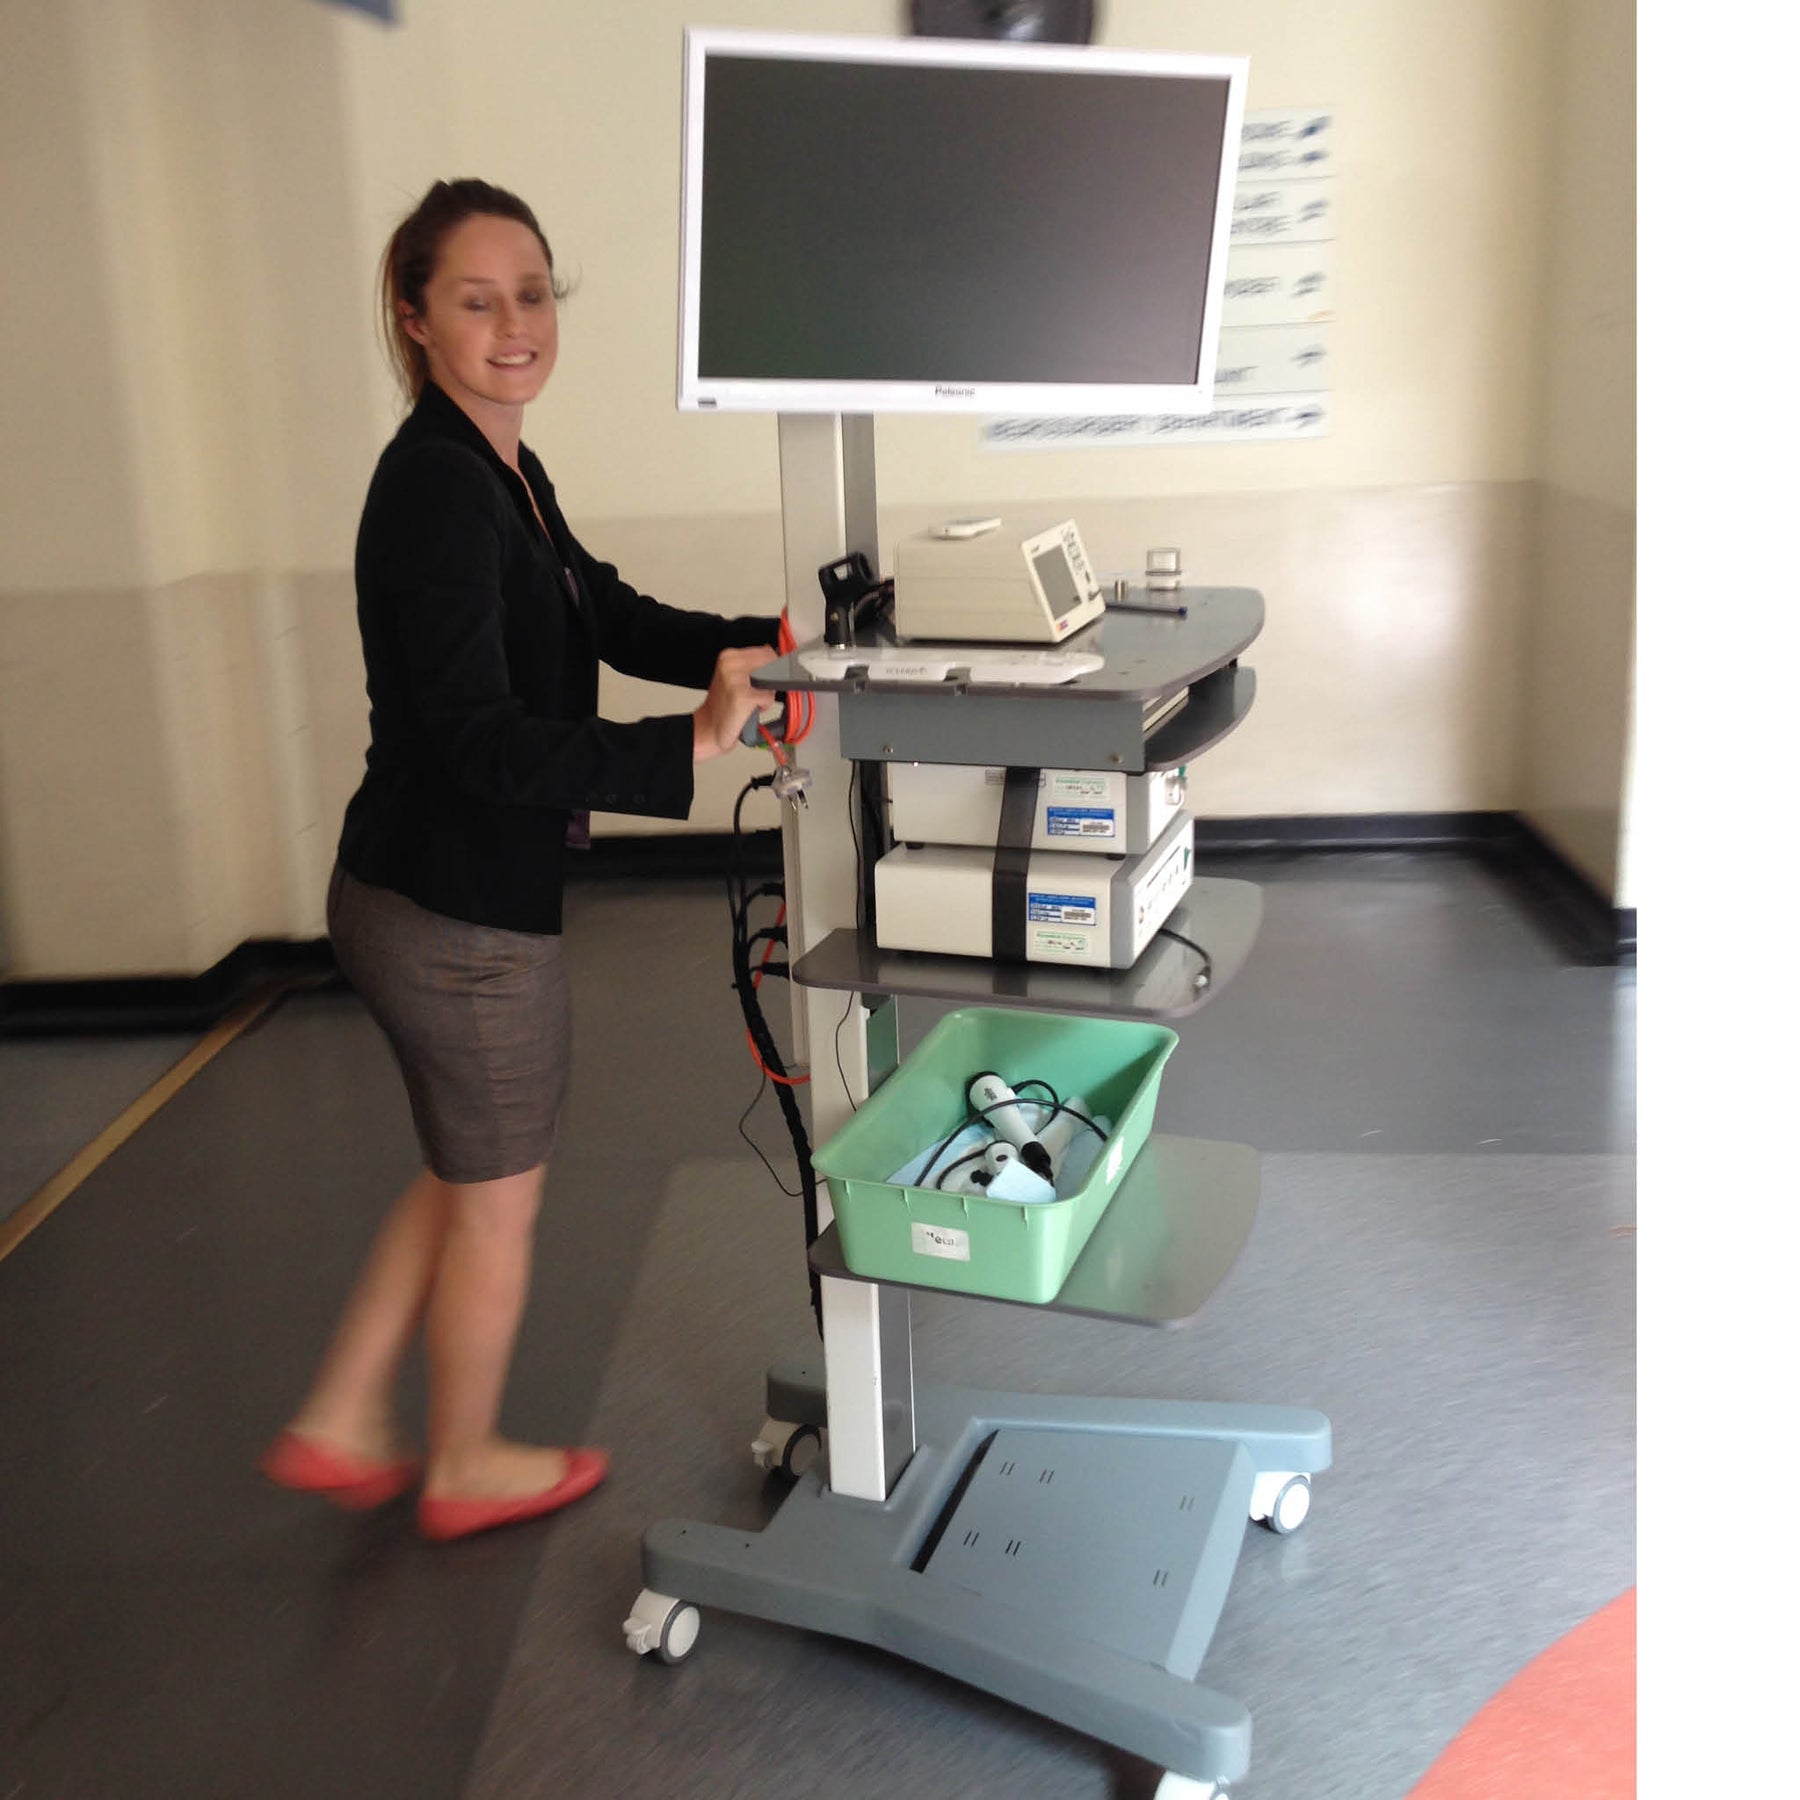 The Ecleris Equipment Cart is fitted with lockable medical grade castors for smooth movement around the clinic